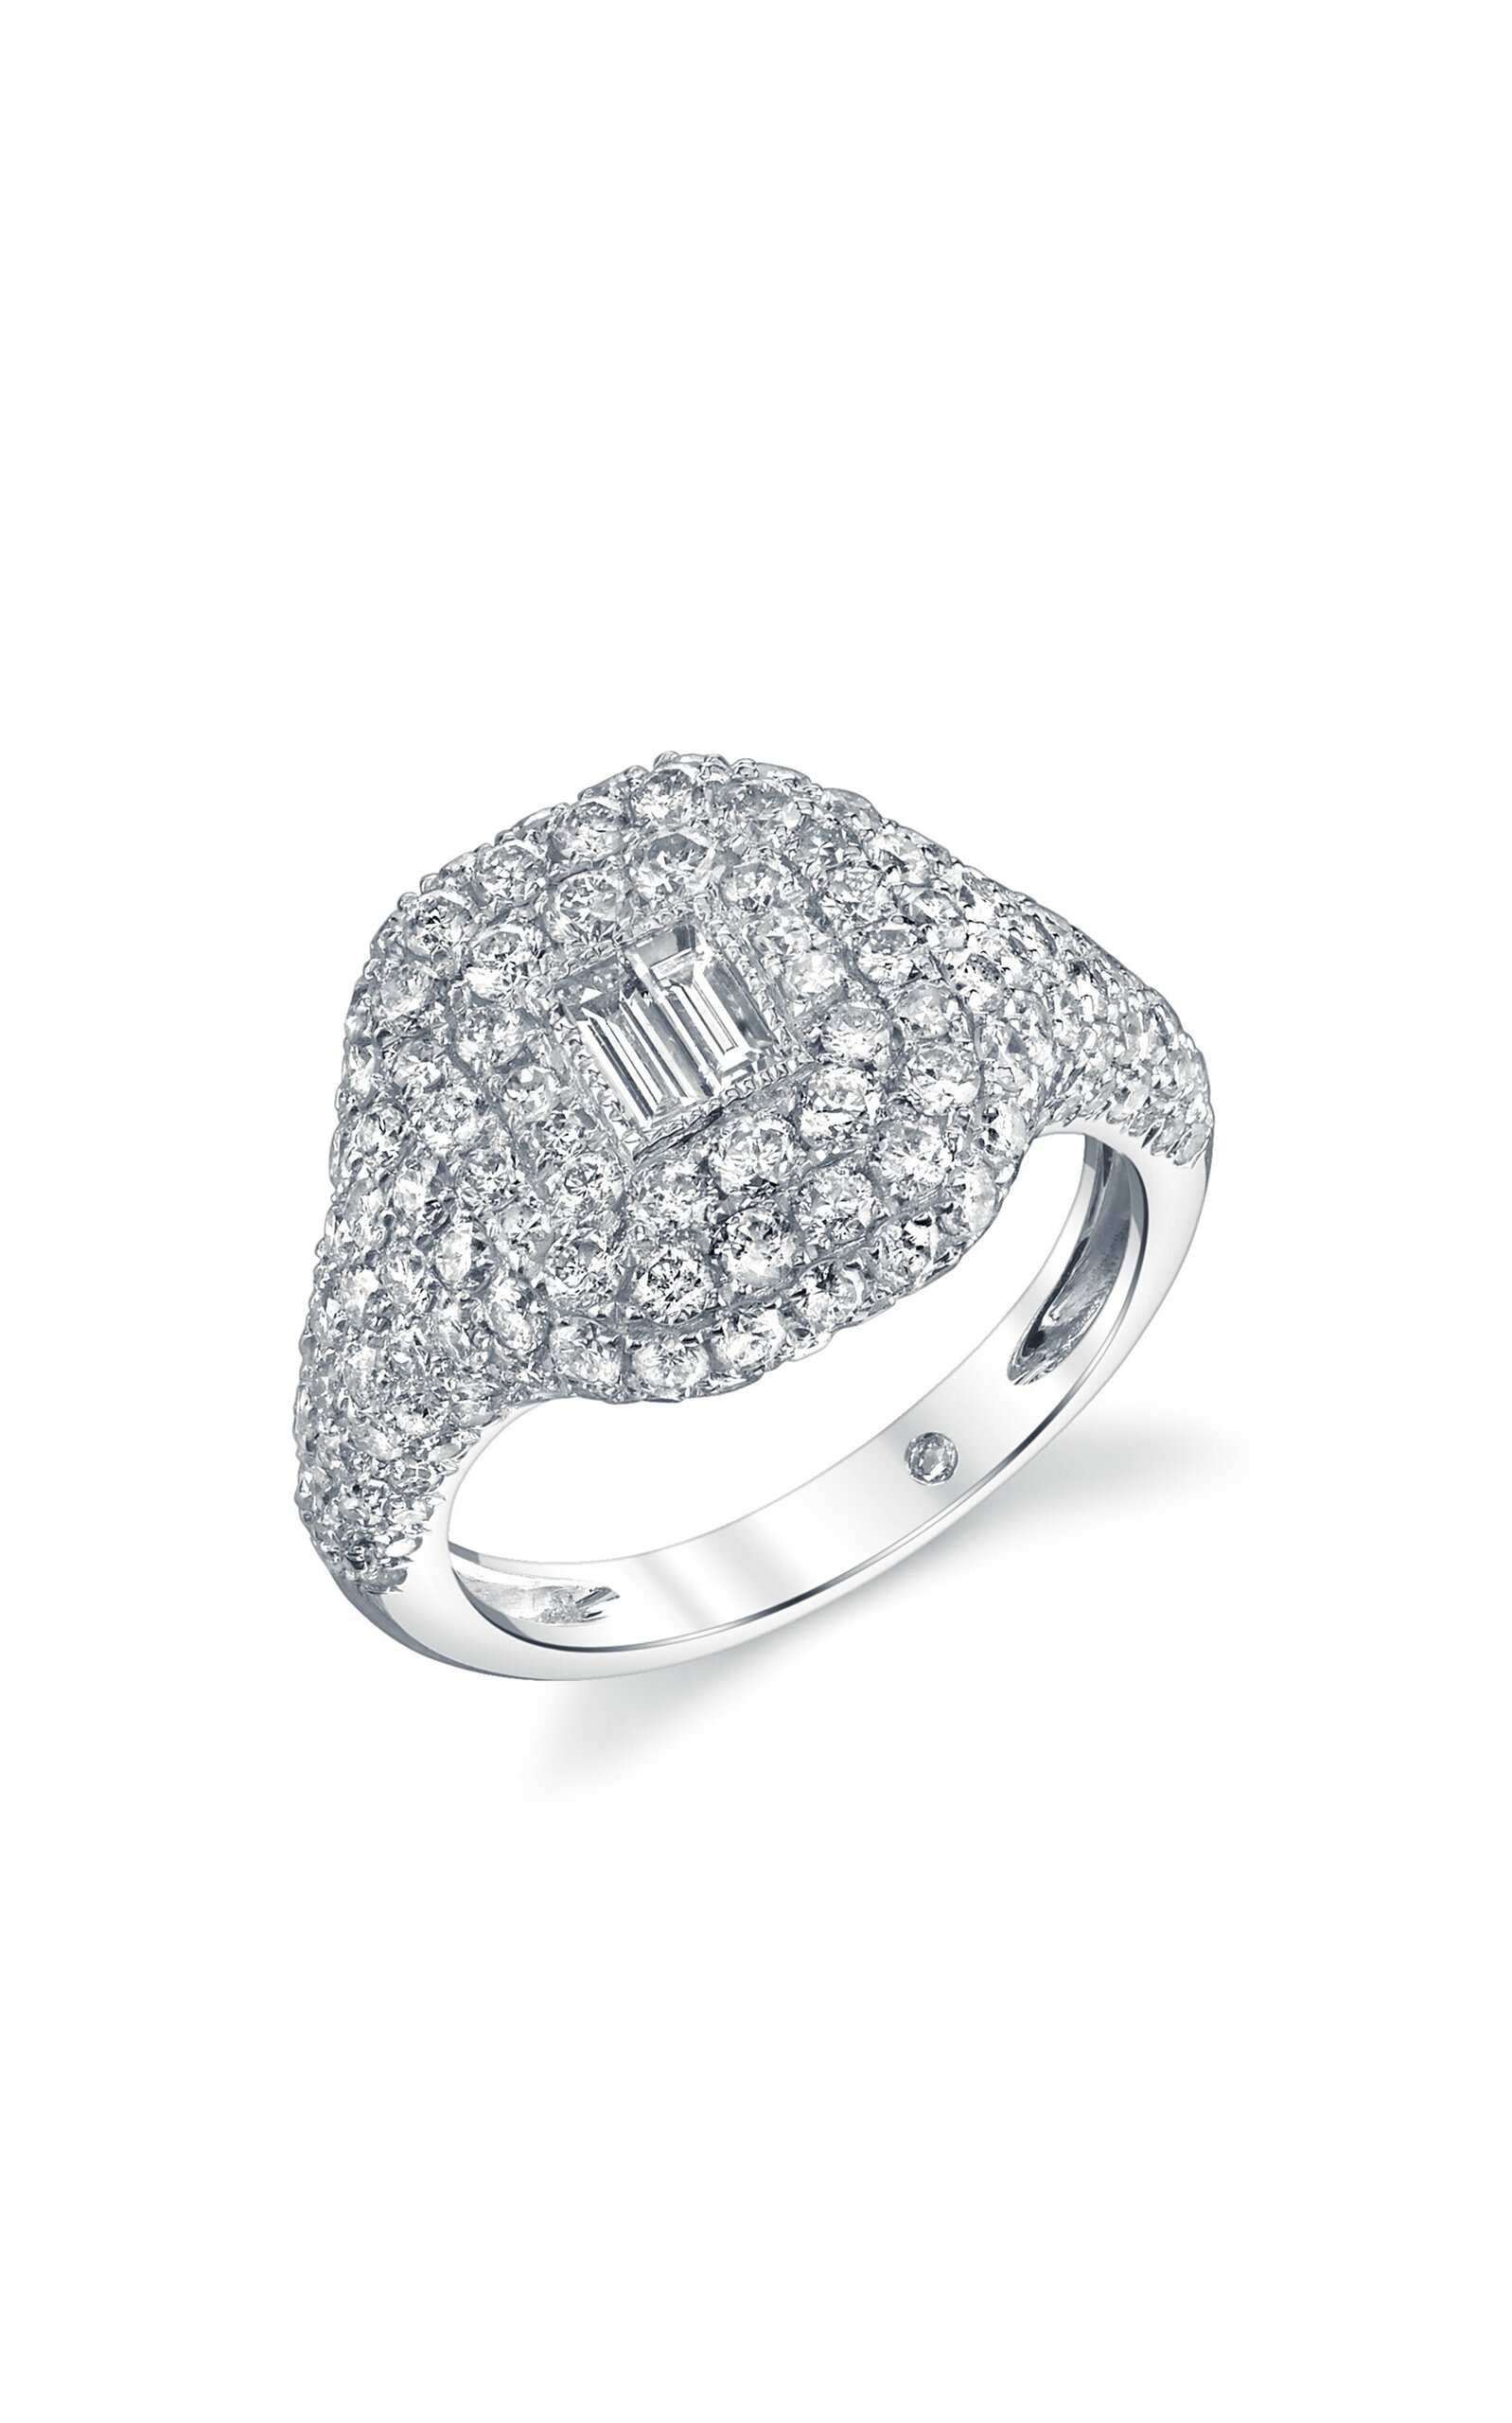 SHAY Women's 18k White Gold Essential Pave Diamond Ring